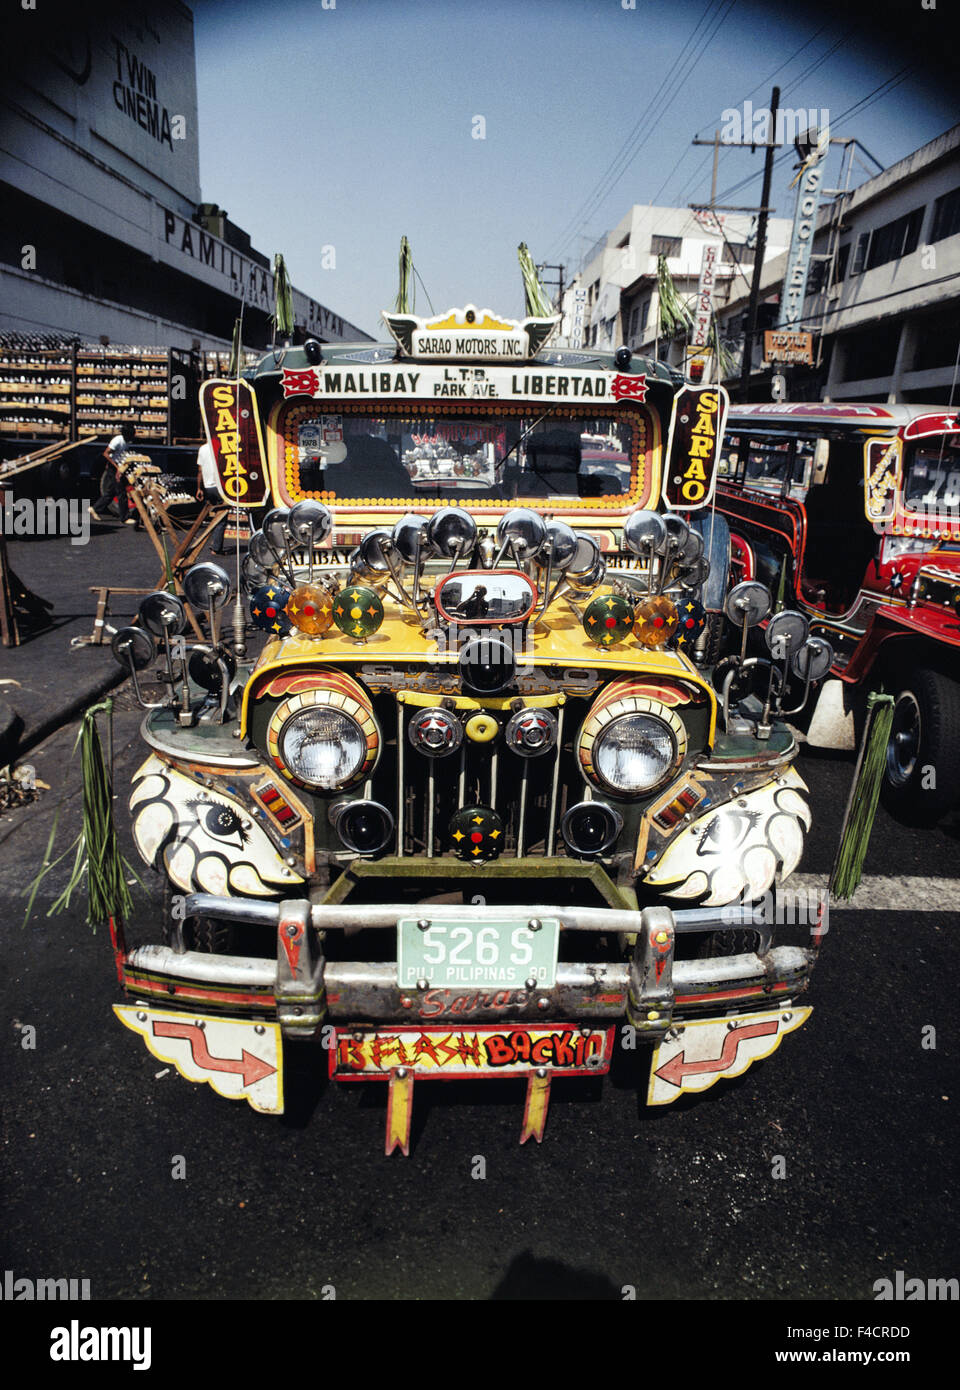 Philippines, Manila, Car racing on street. (Large format sizes available) Stock Photo